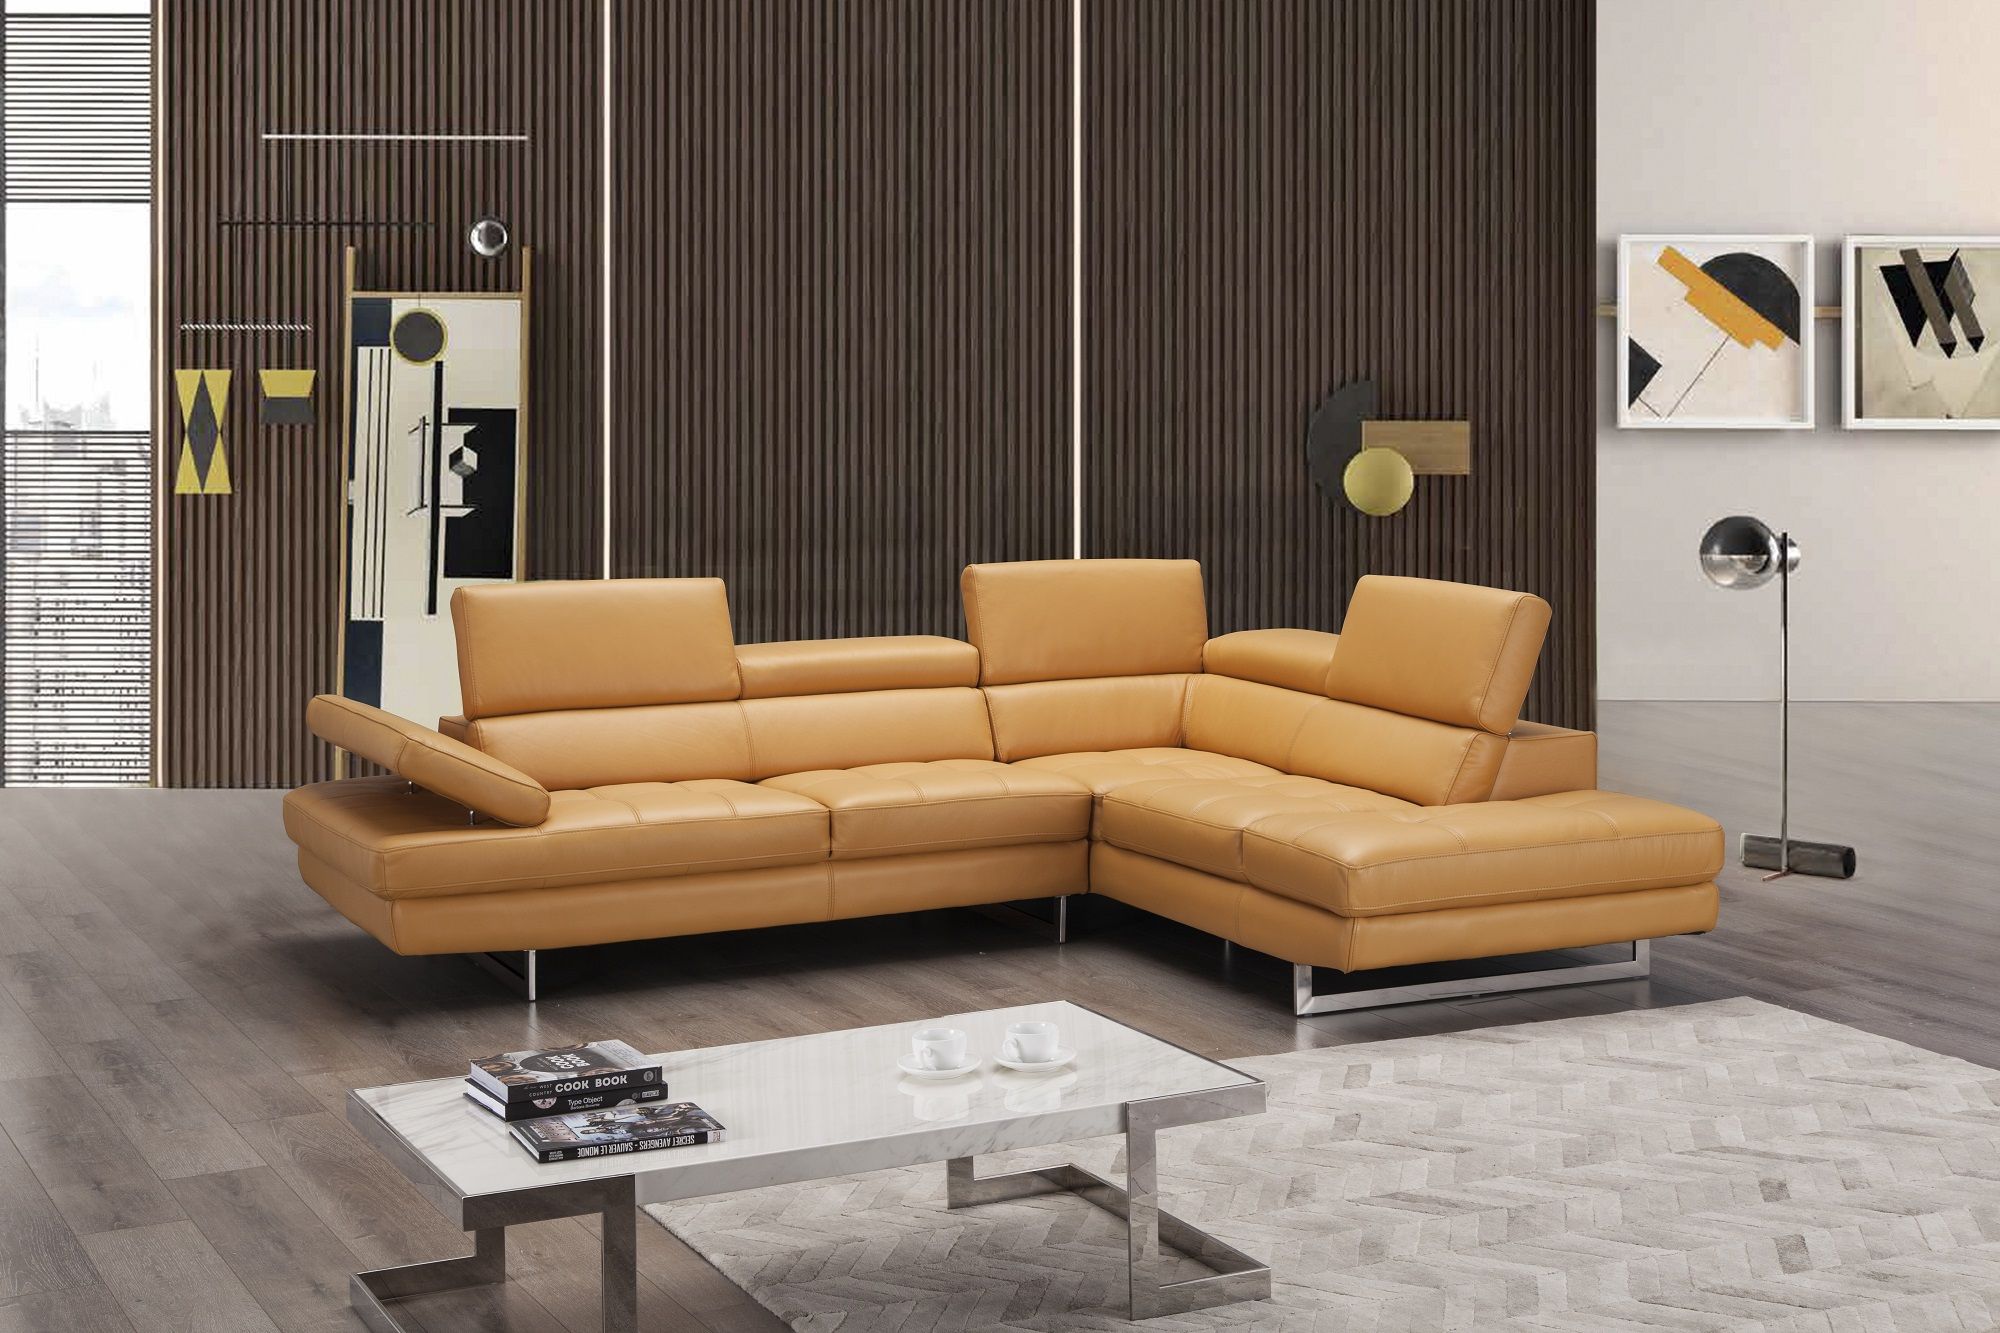 Elegant Modern Leather L Shape Sectional Washington Dc J&m Furniture In Modern L Shaped Sofa Sectionals (Gallery 4 of 20)